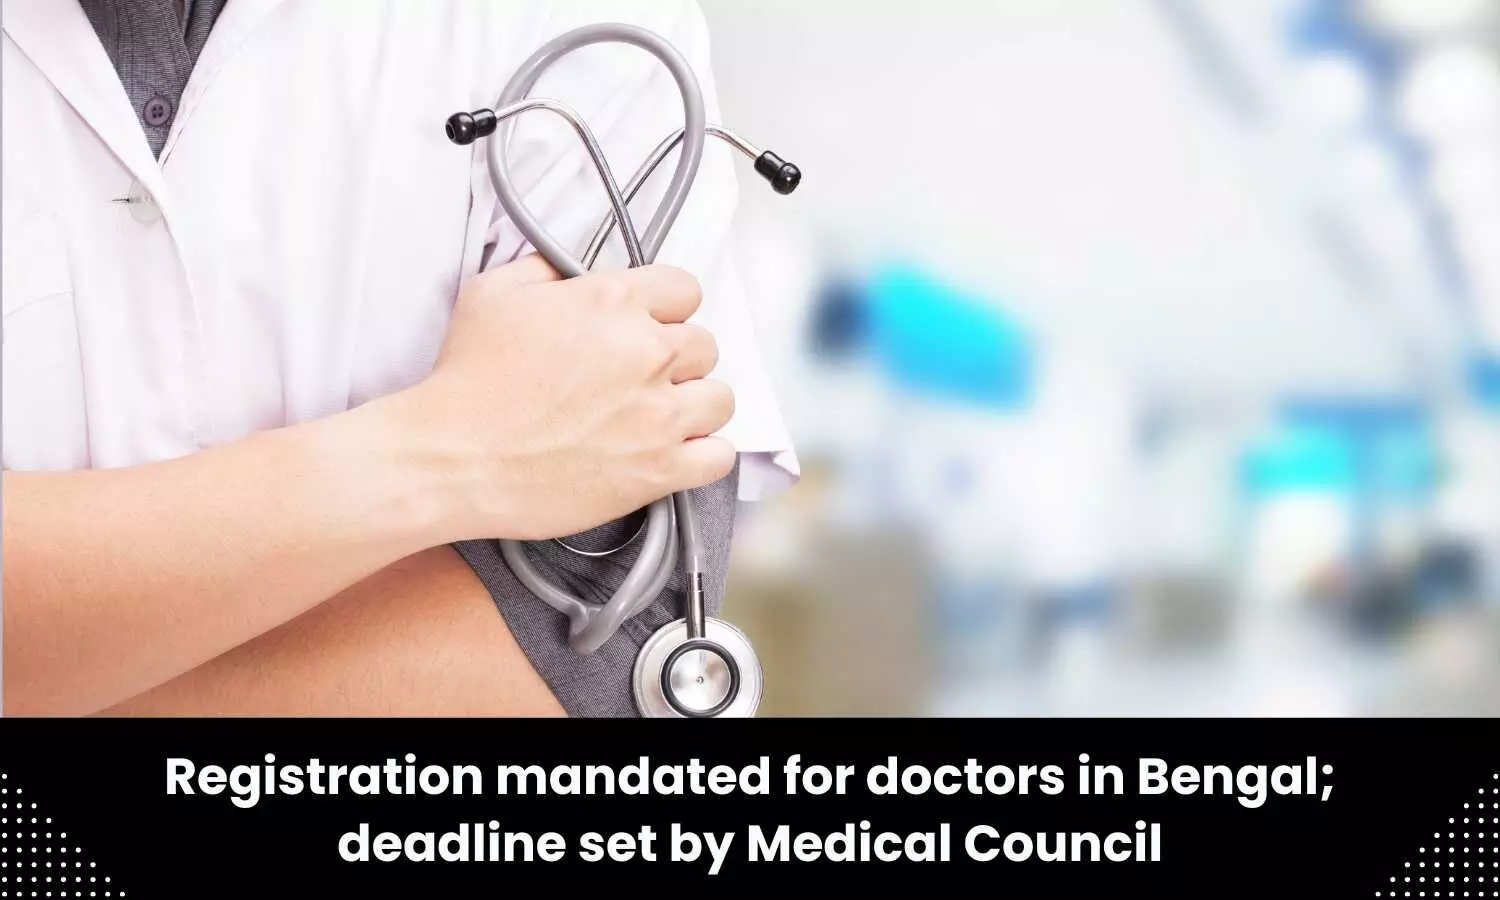 Doctors practising, studying in Bengal mandatorily require registration with West Bengal Medical Council